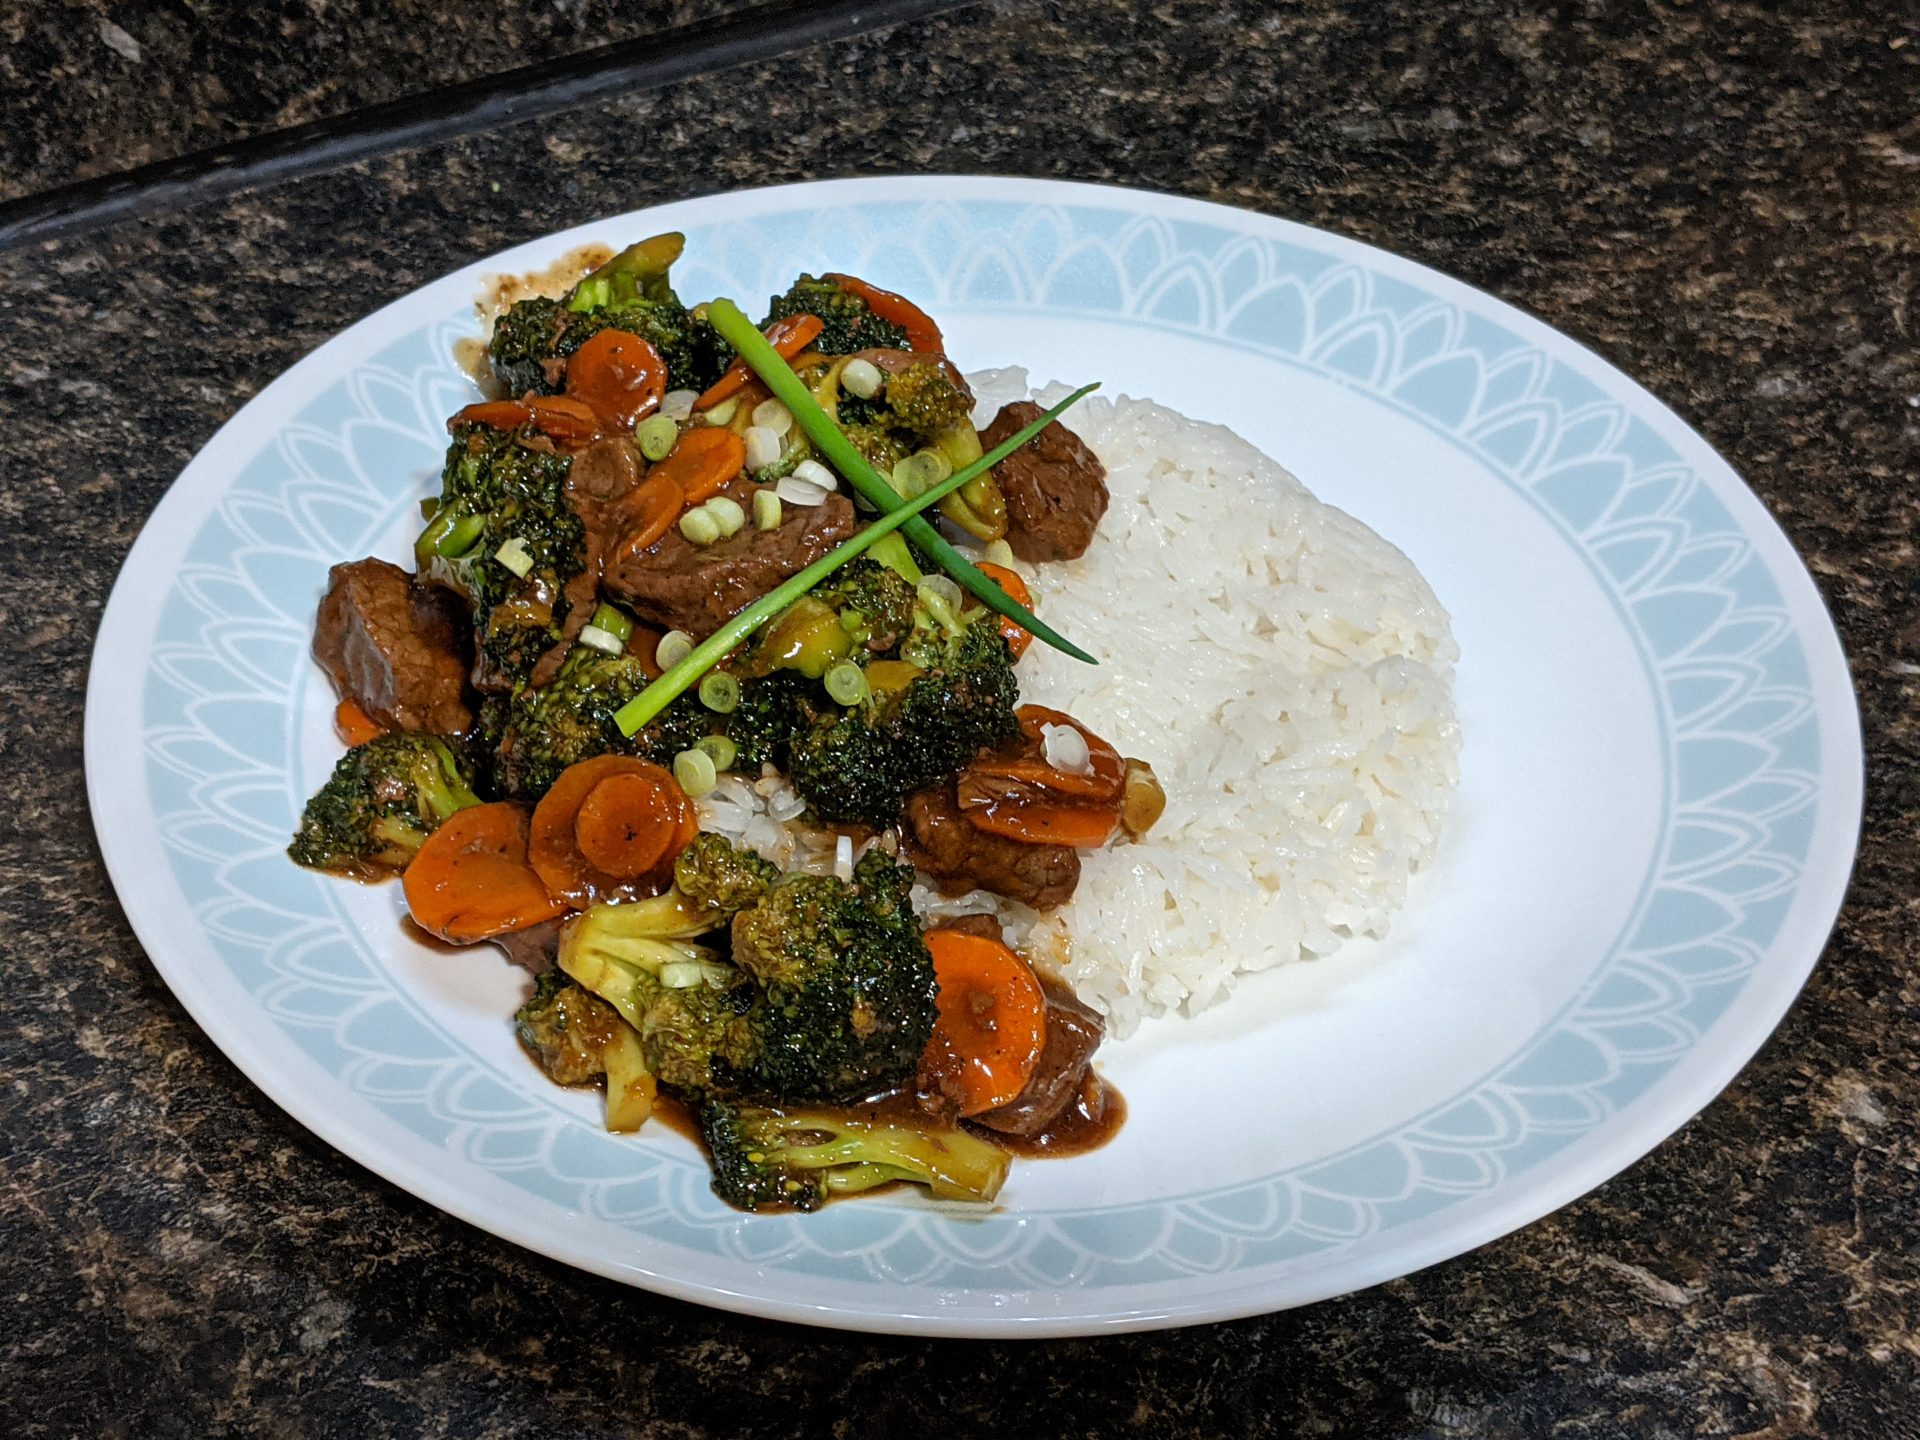 Beef and Broccoli with rice on a plate